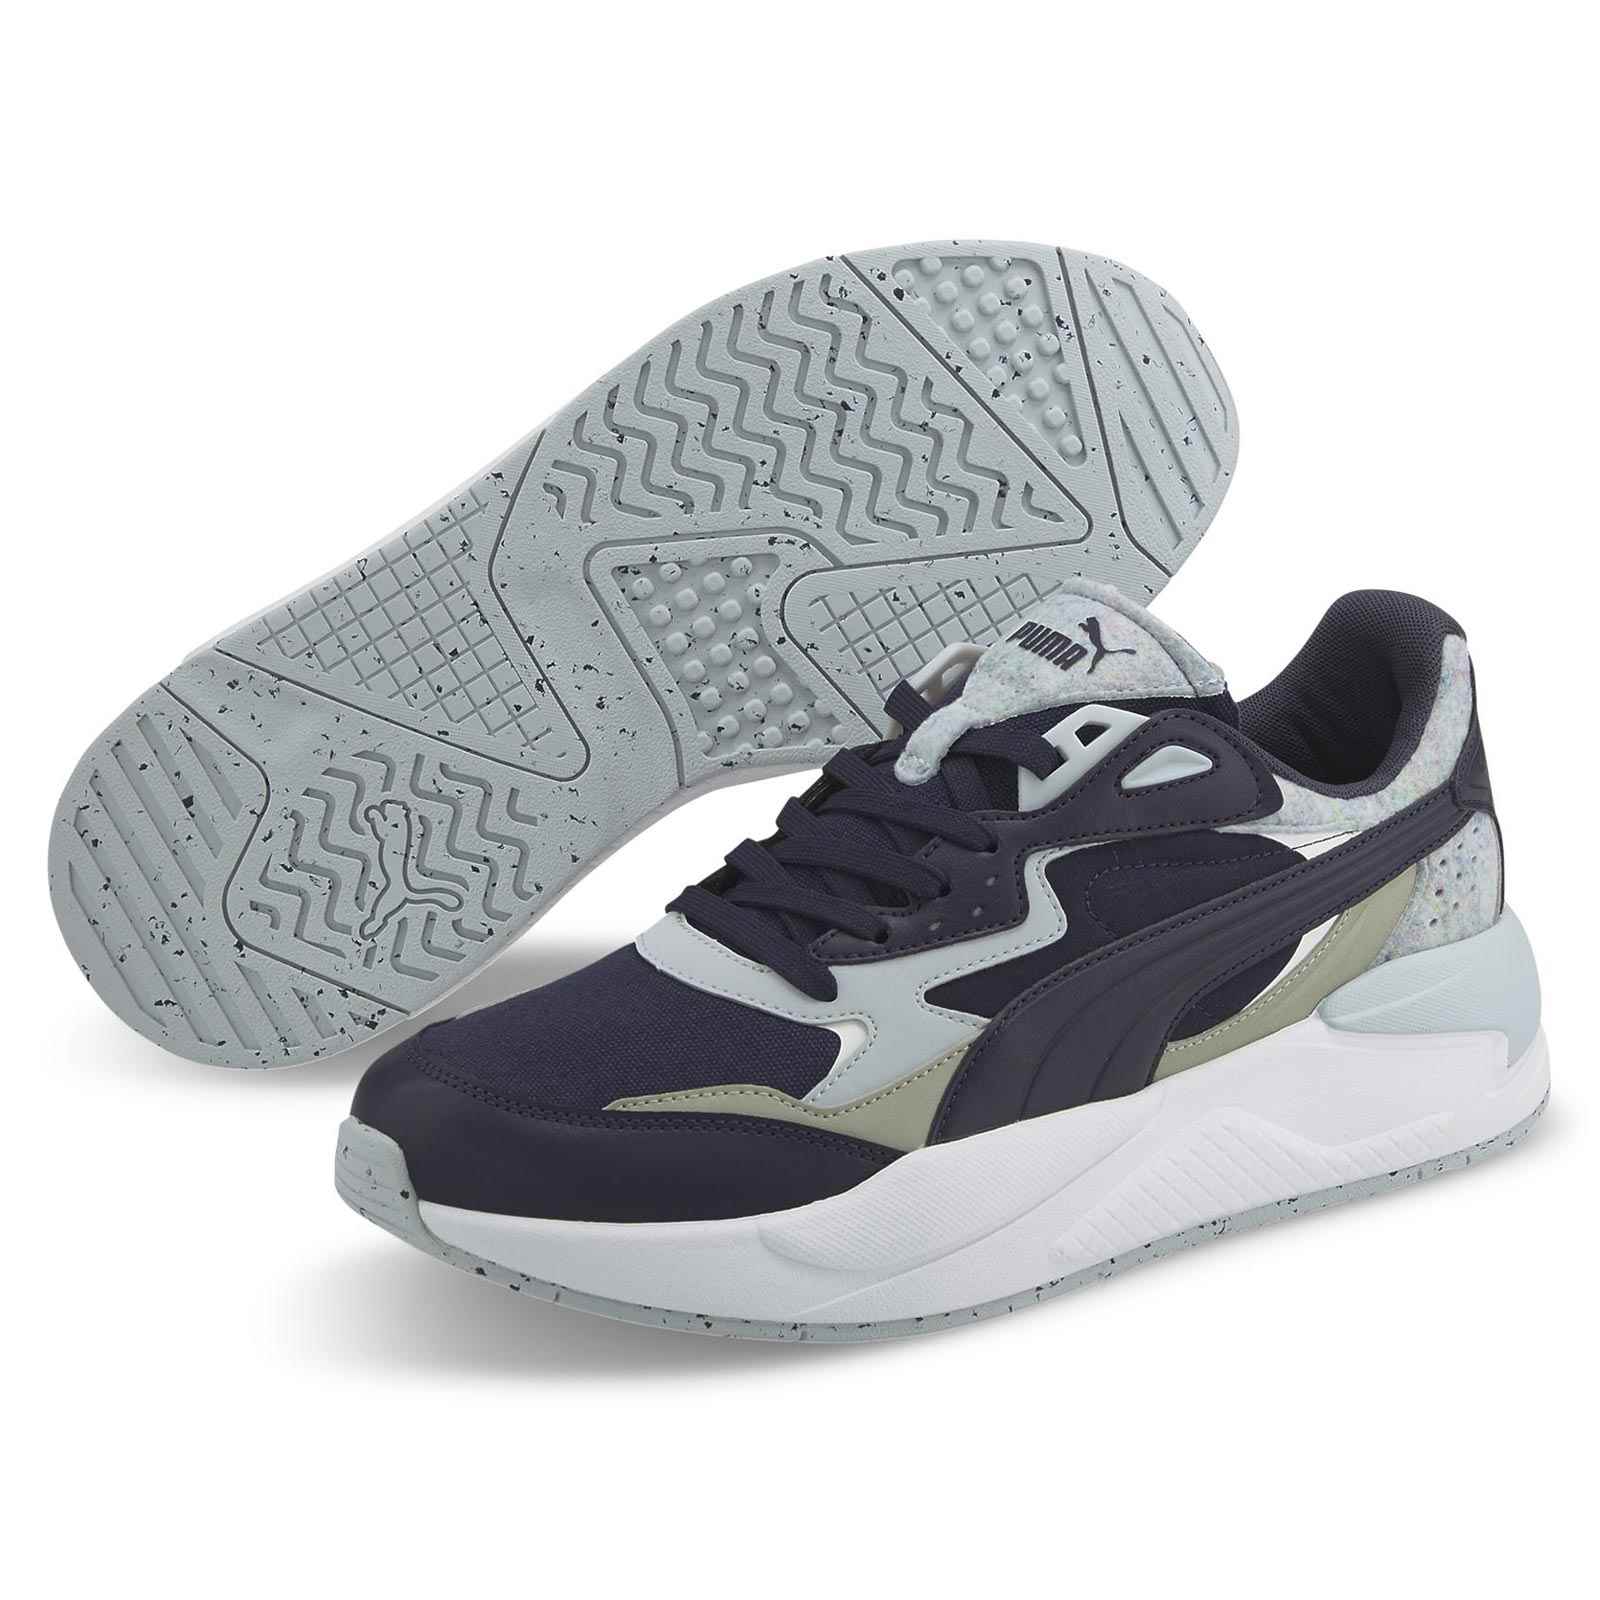 PUMA X-RAY SPEED BETTER MENS TRAINERS